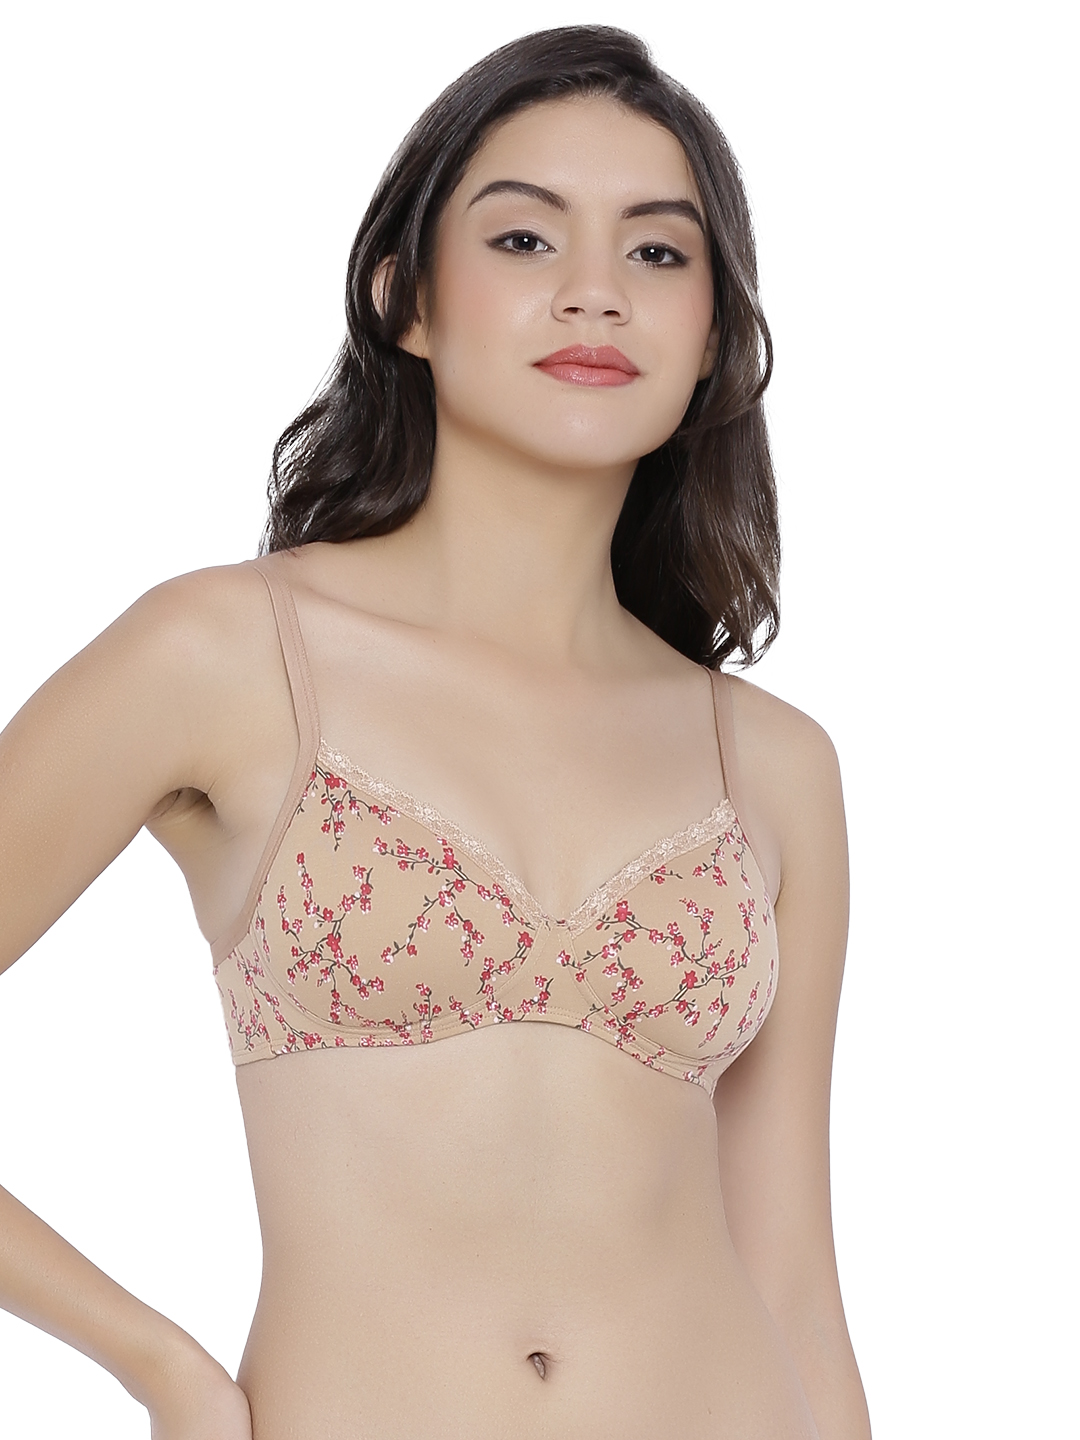 Amante Nude-Coloured Full-Coverage Floral Print T-shirt Bra BFCV32 Price in India